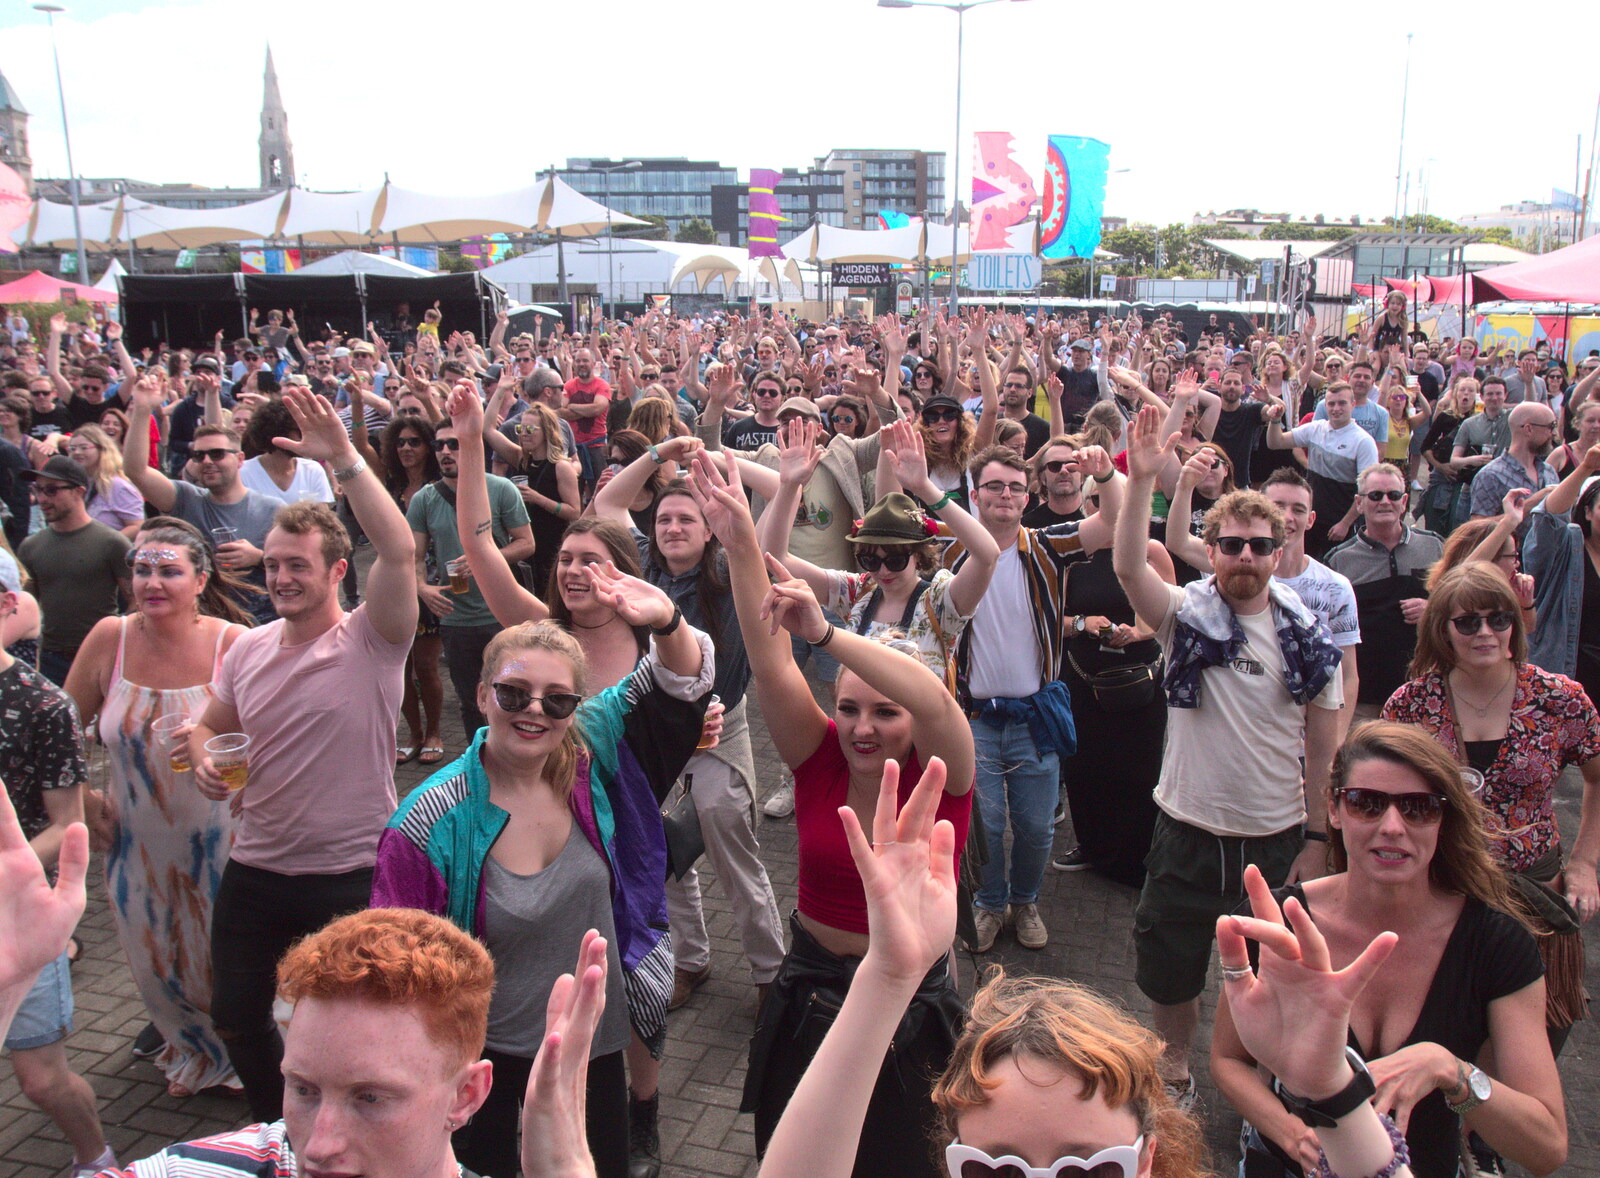 The crowd goes nuts from Beatyard Festival, Dún Laoghaire, County Dublin, Ireland - 5th August 2018